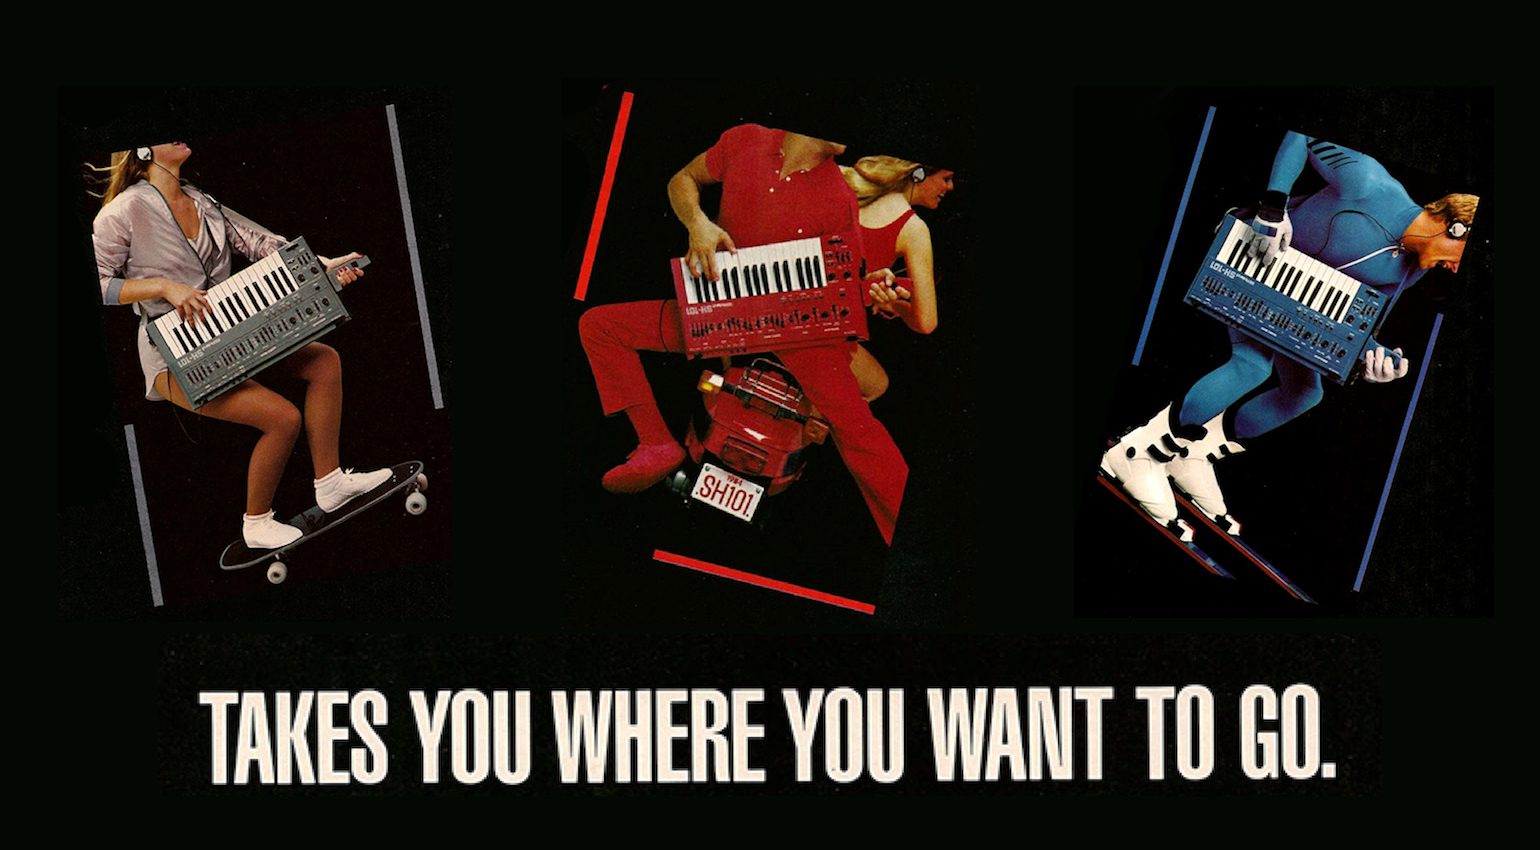 80s Roland SH-101 advertising campaign.